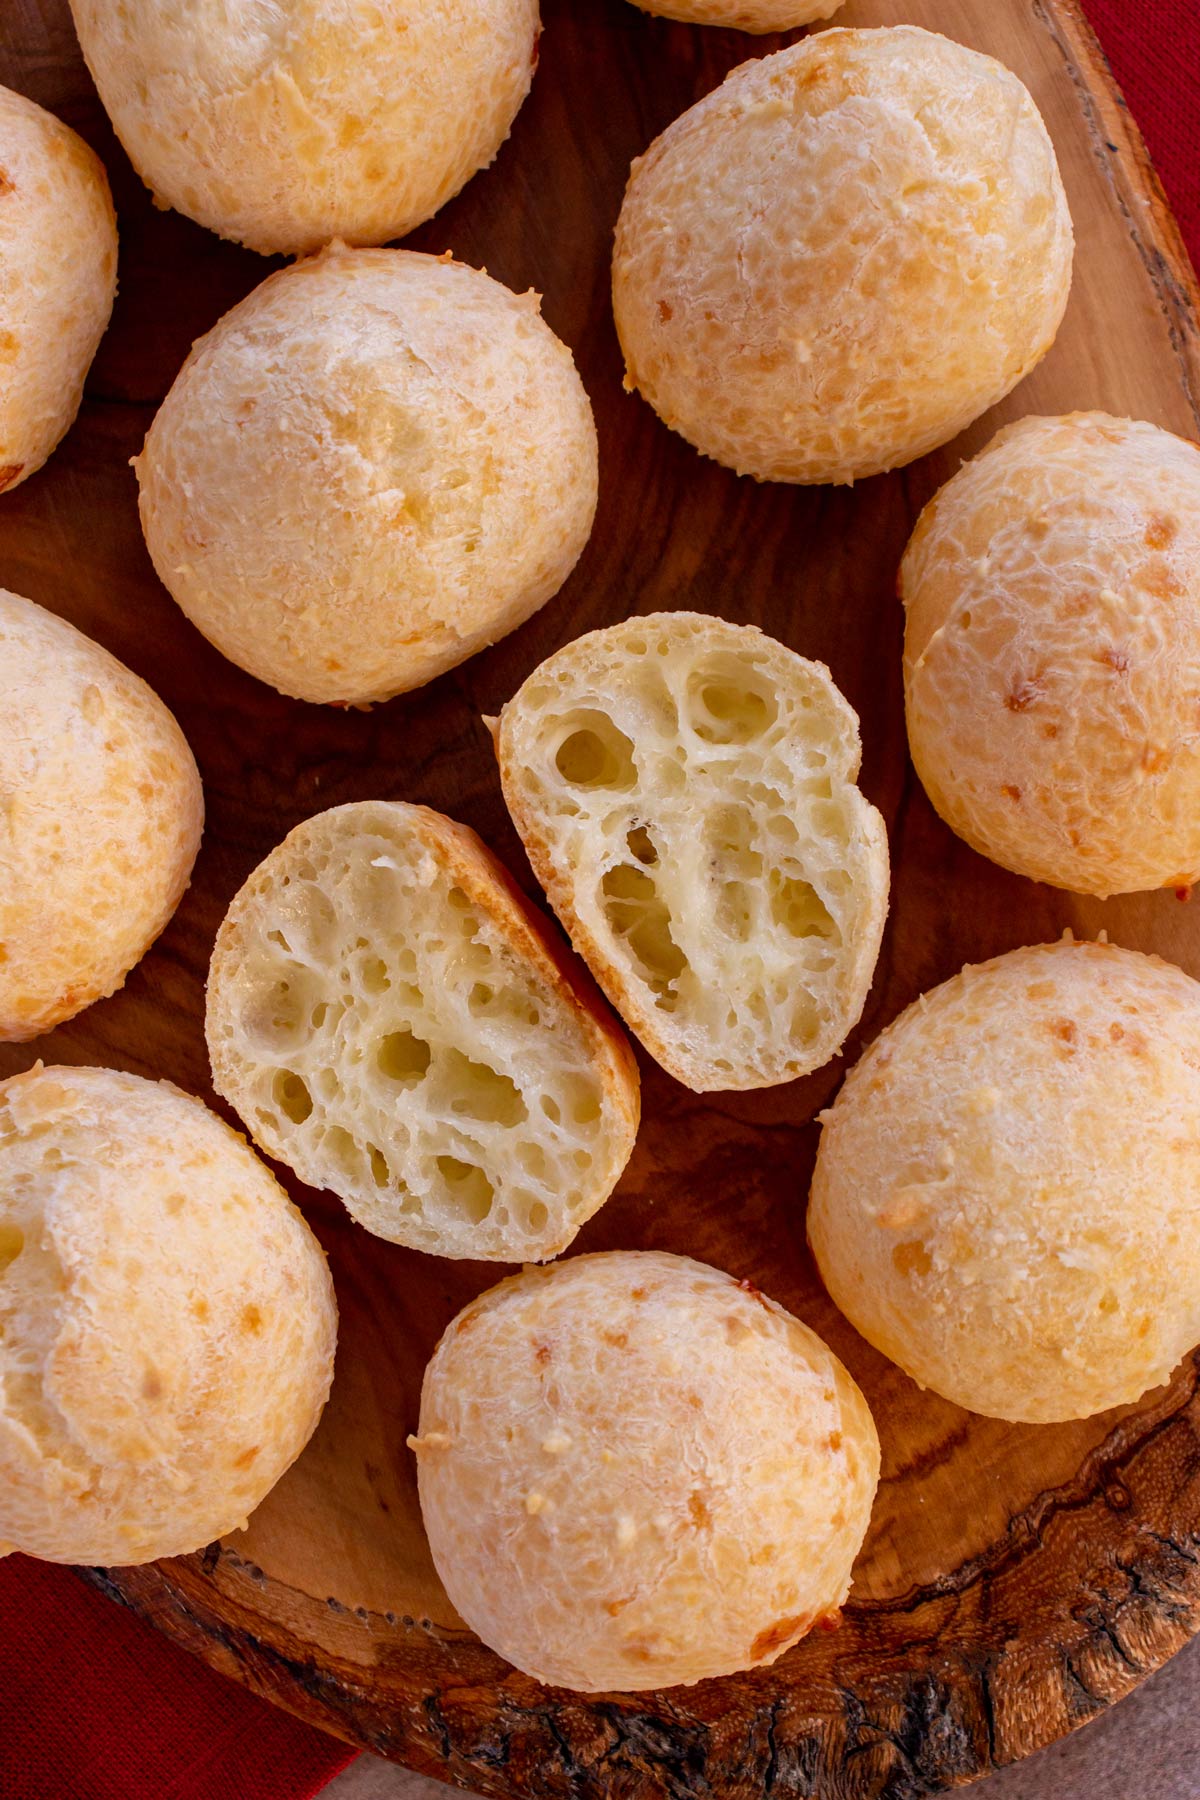 Round lightly golden Brazilian cheese breads on a wooden surface with one cut in half.